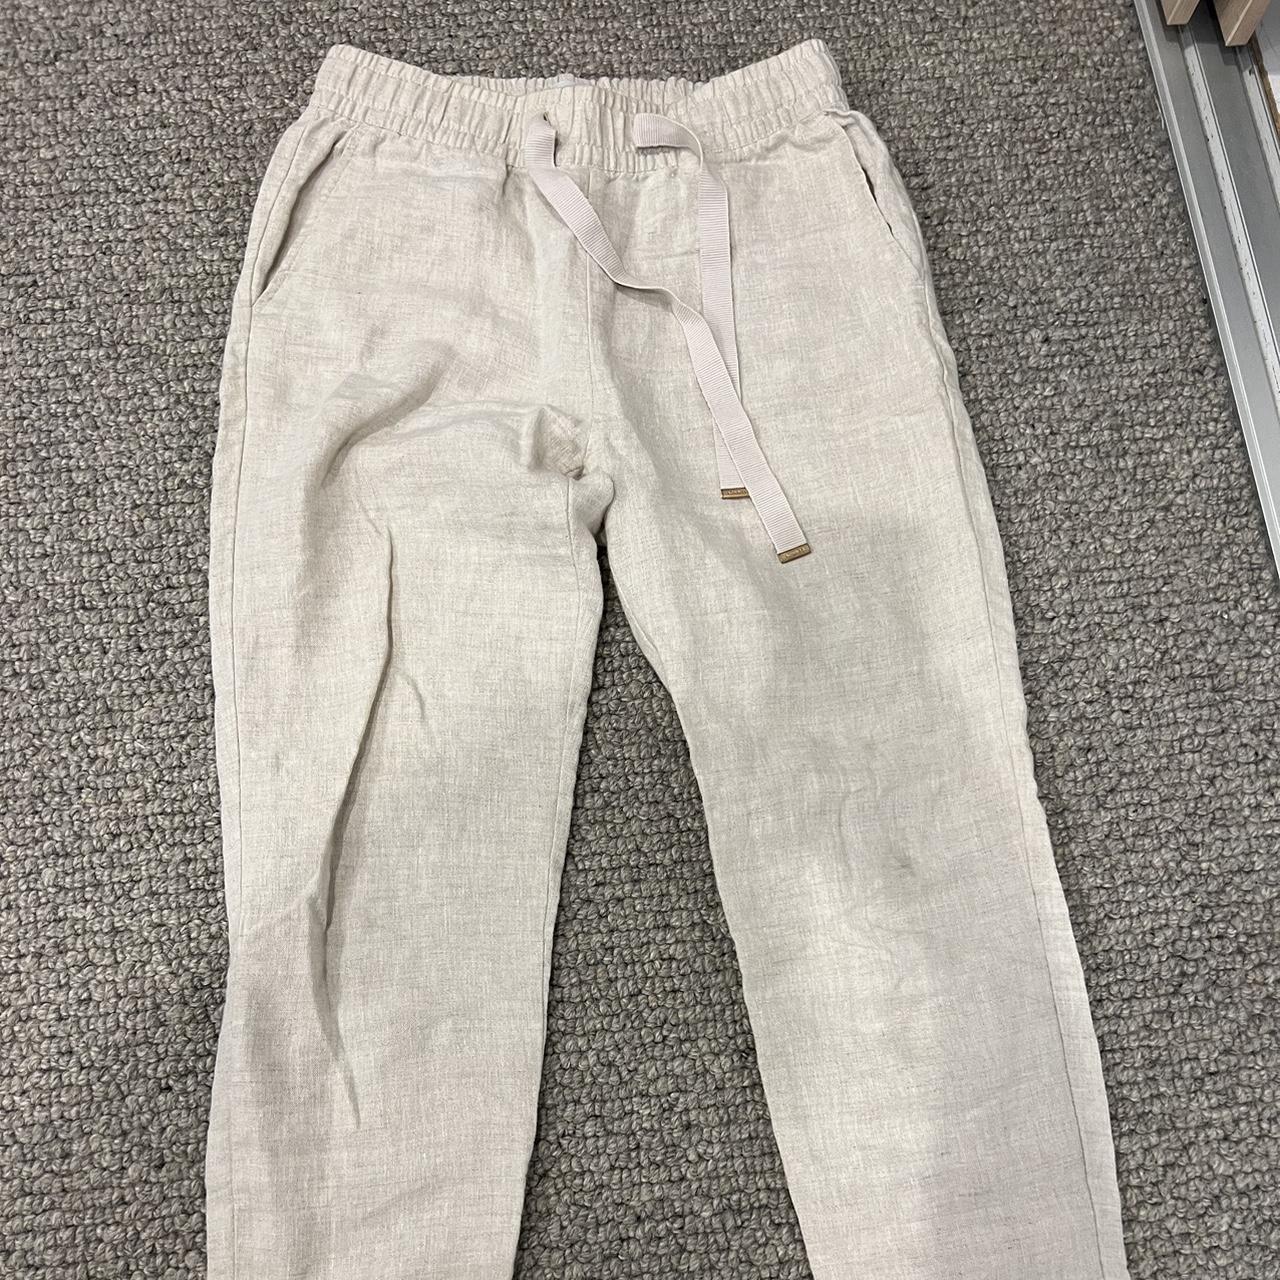 VENROY tan pants - size small🤎🤎🤎Great condition!! - Depop